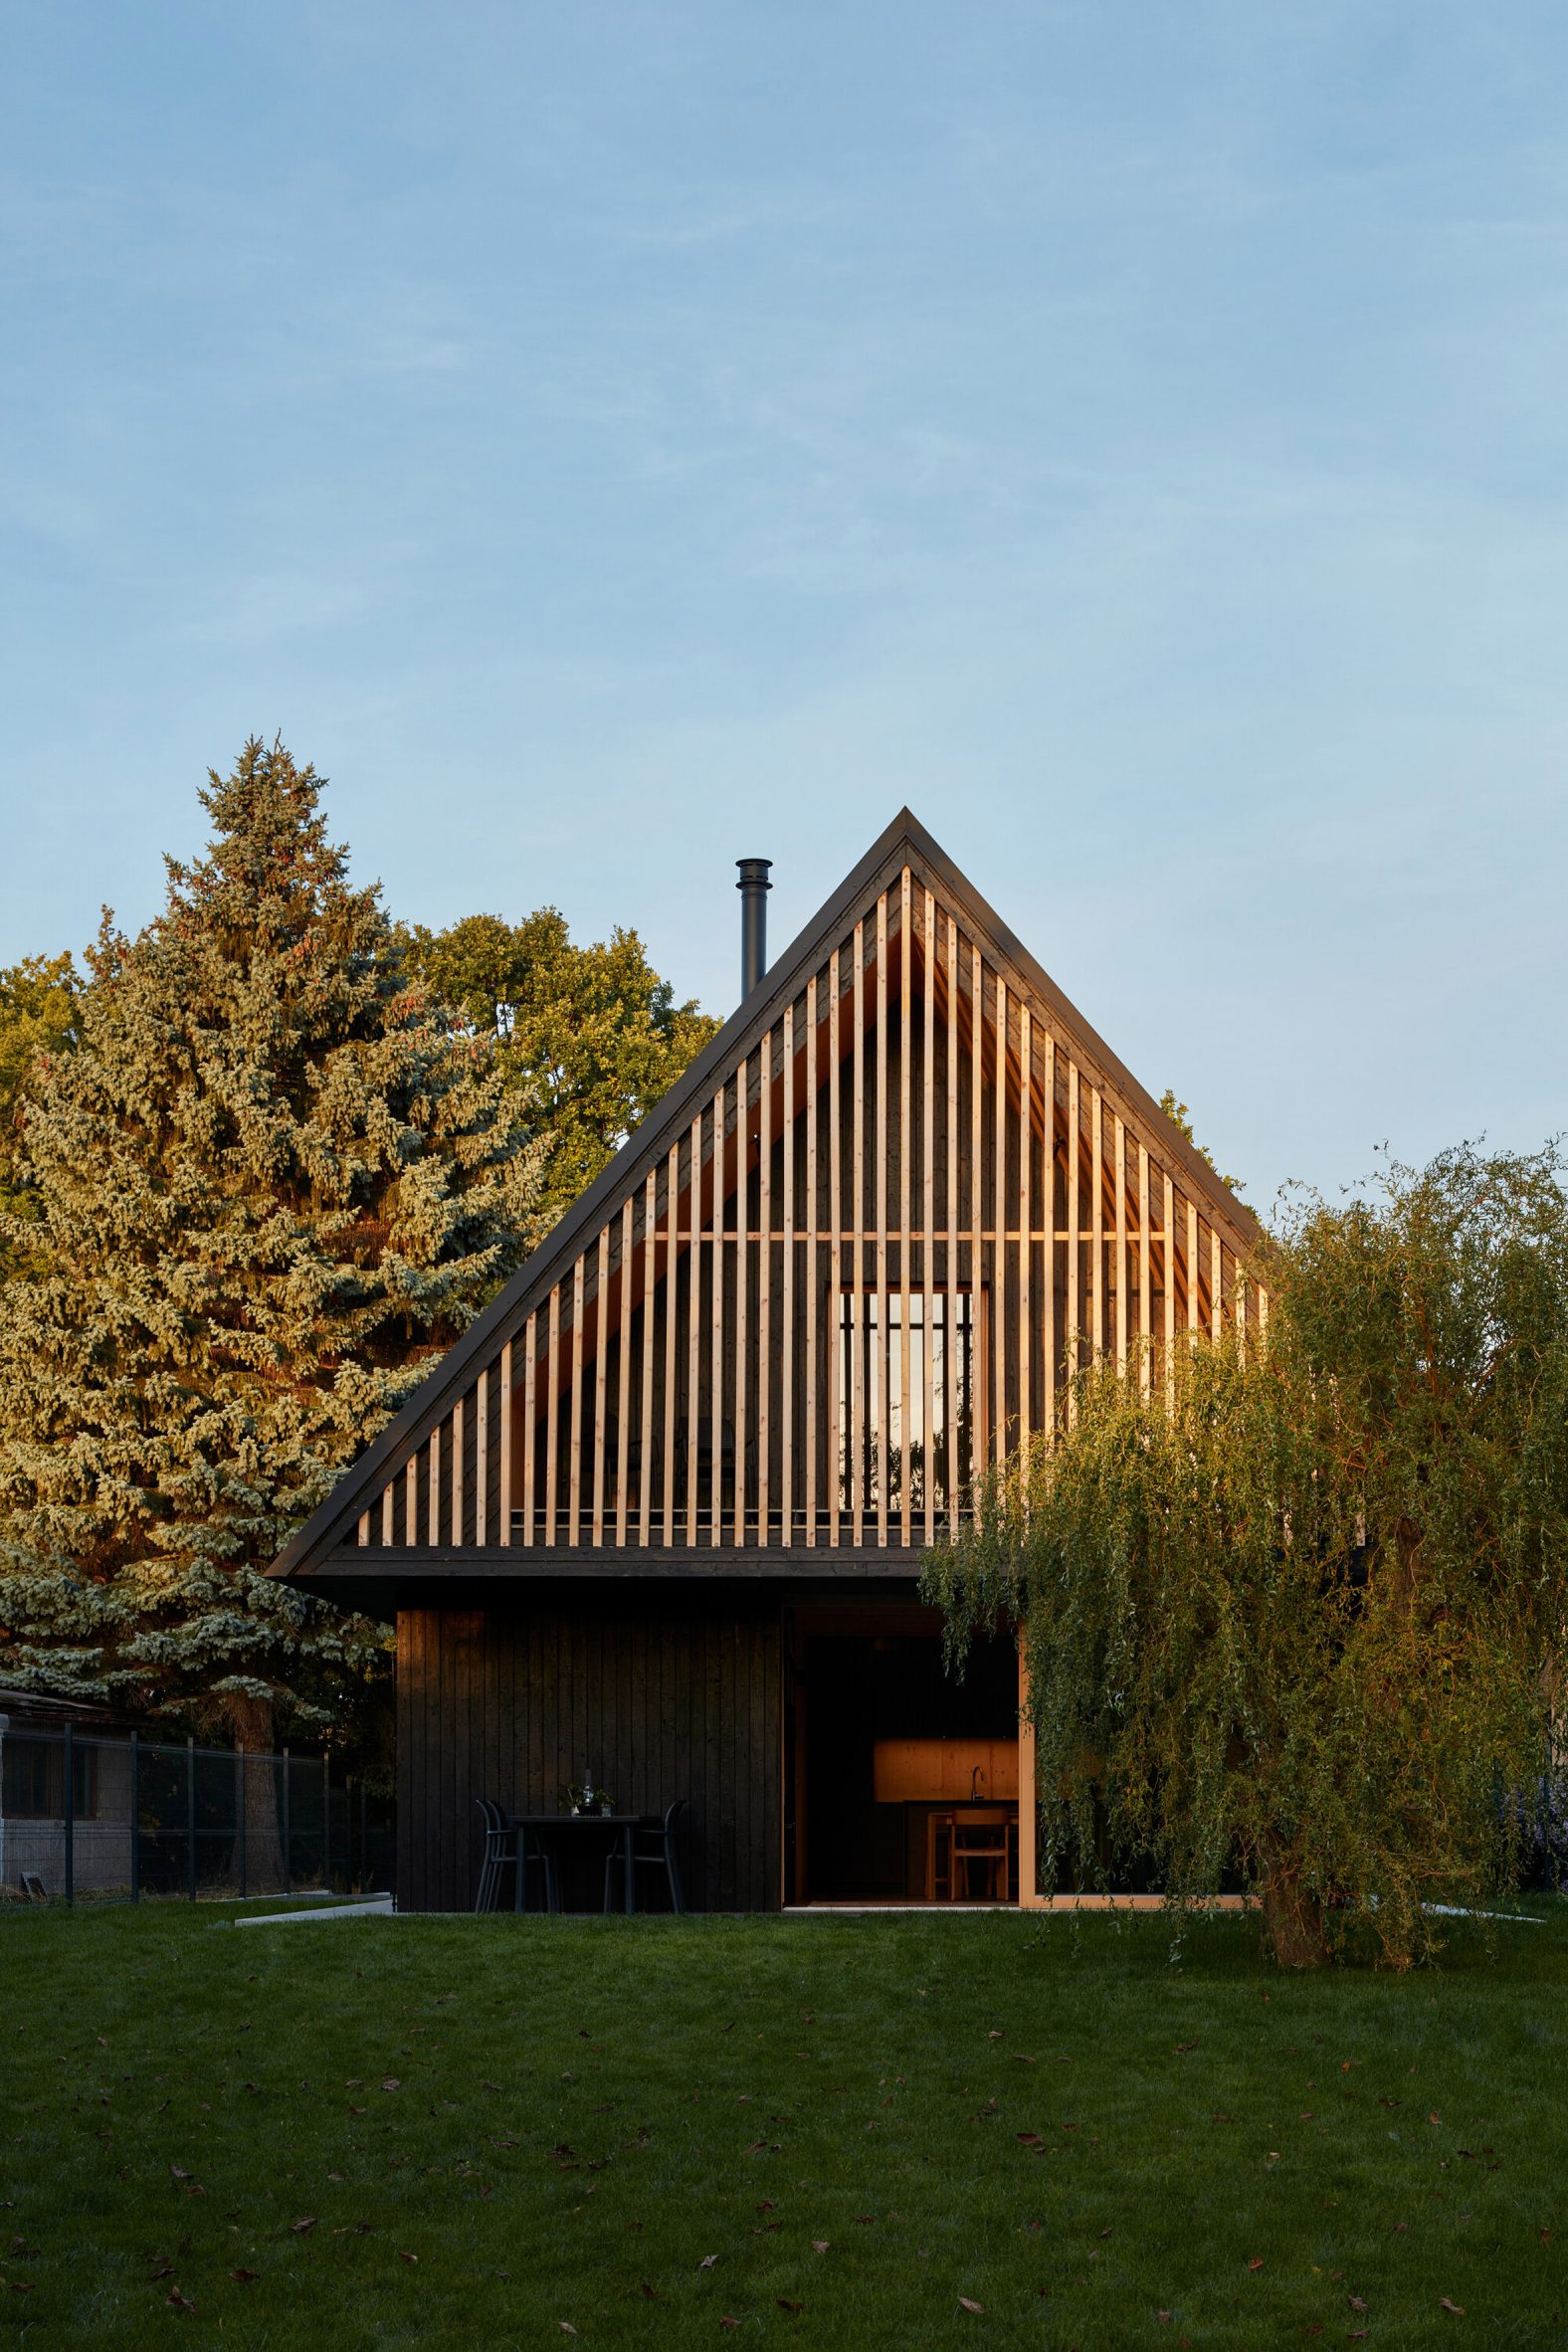 Timber clad facade of the Hut-inspired House by Atelier Hajný